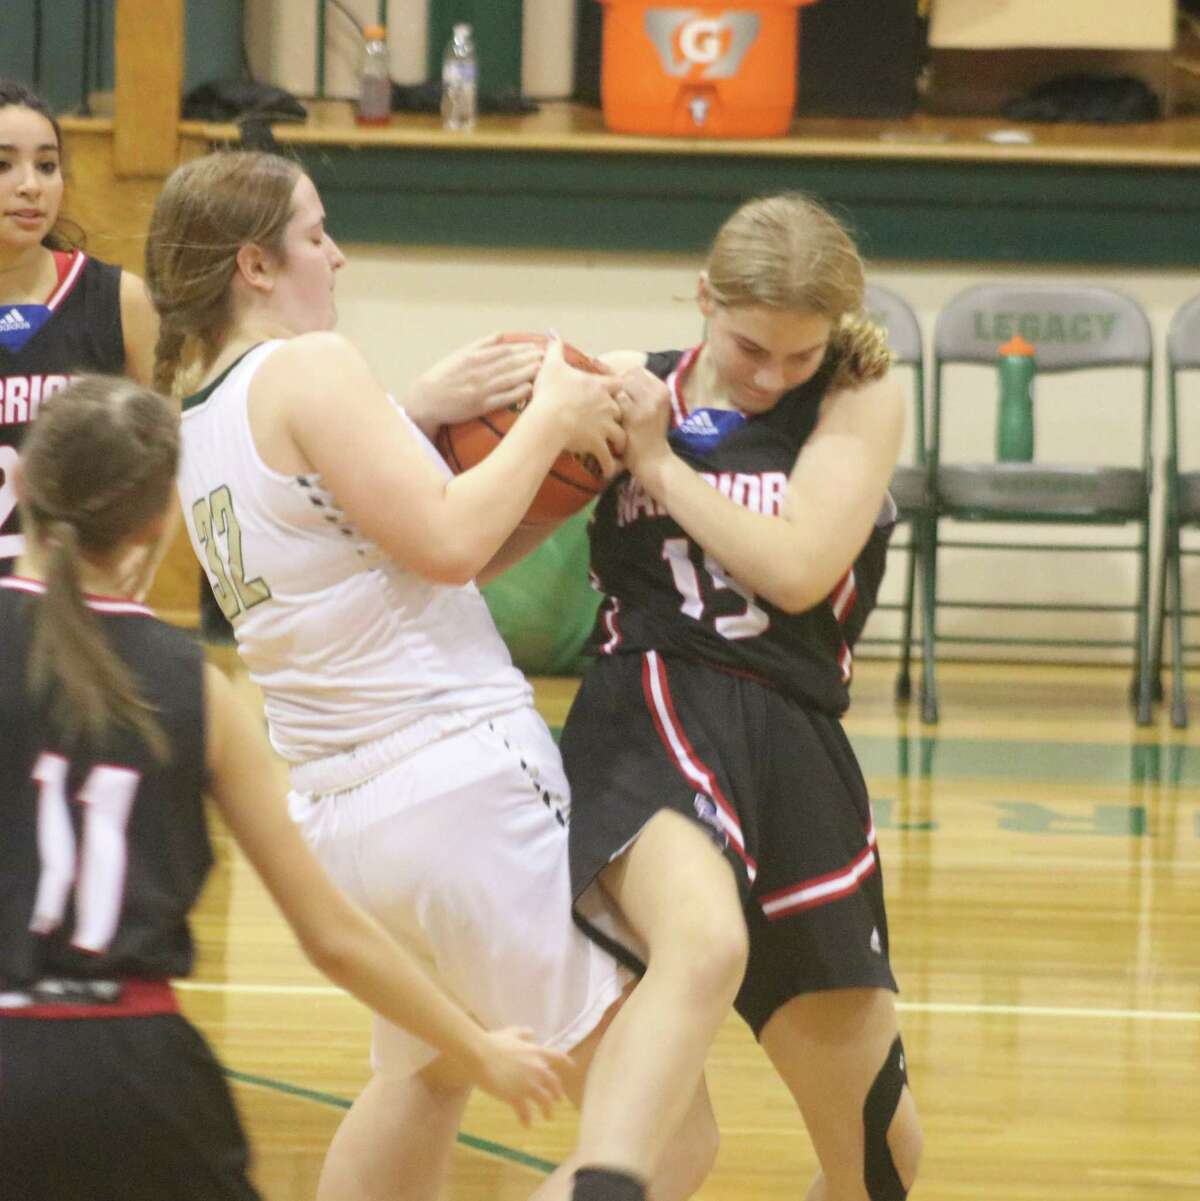 Pasadena First Baptist freshman Reagan Aubin (right) and a Beaumont Legacy player produce a battle that resulted in a jump ball Tuesday night in Beaumont.